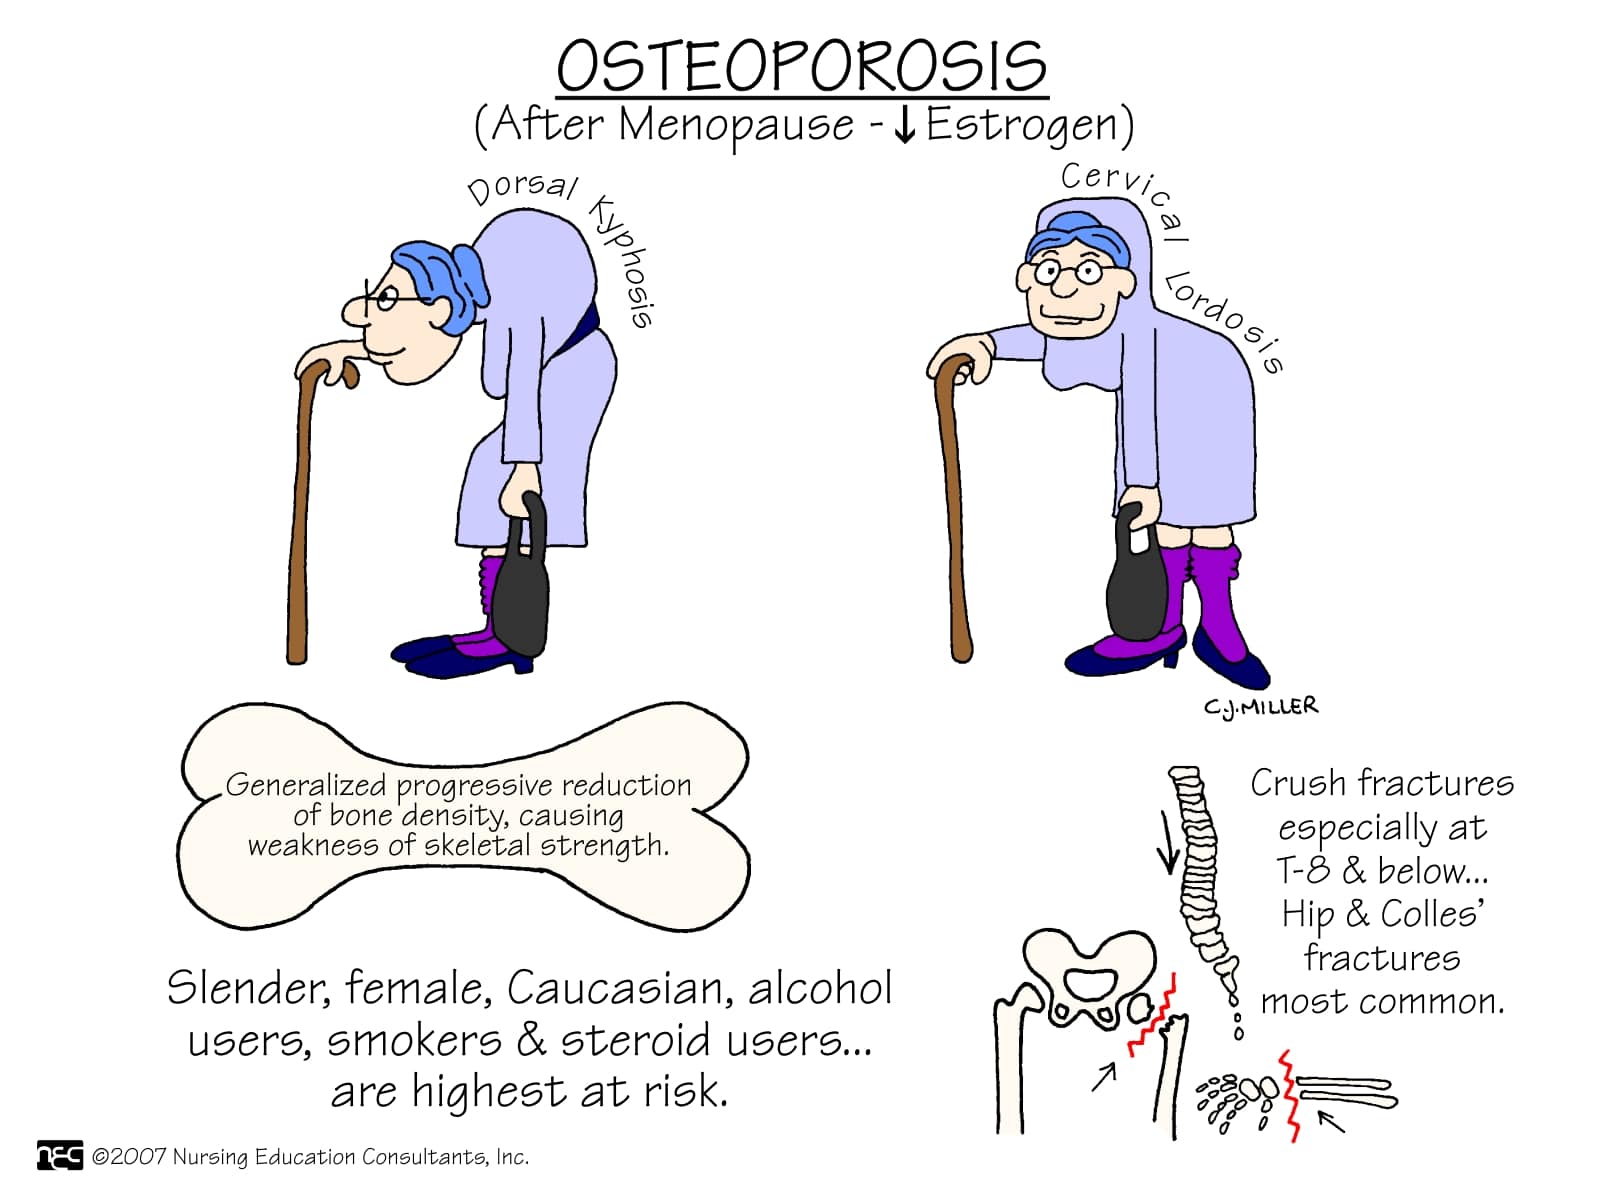 The Natural Treatment For Osteoporosis - My Life With No Drugs